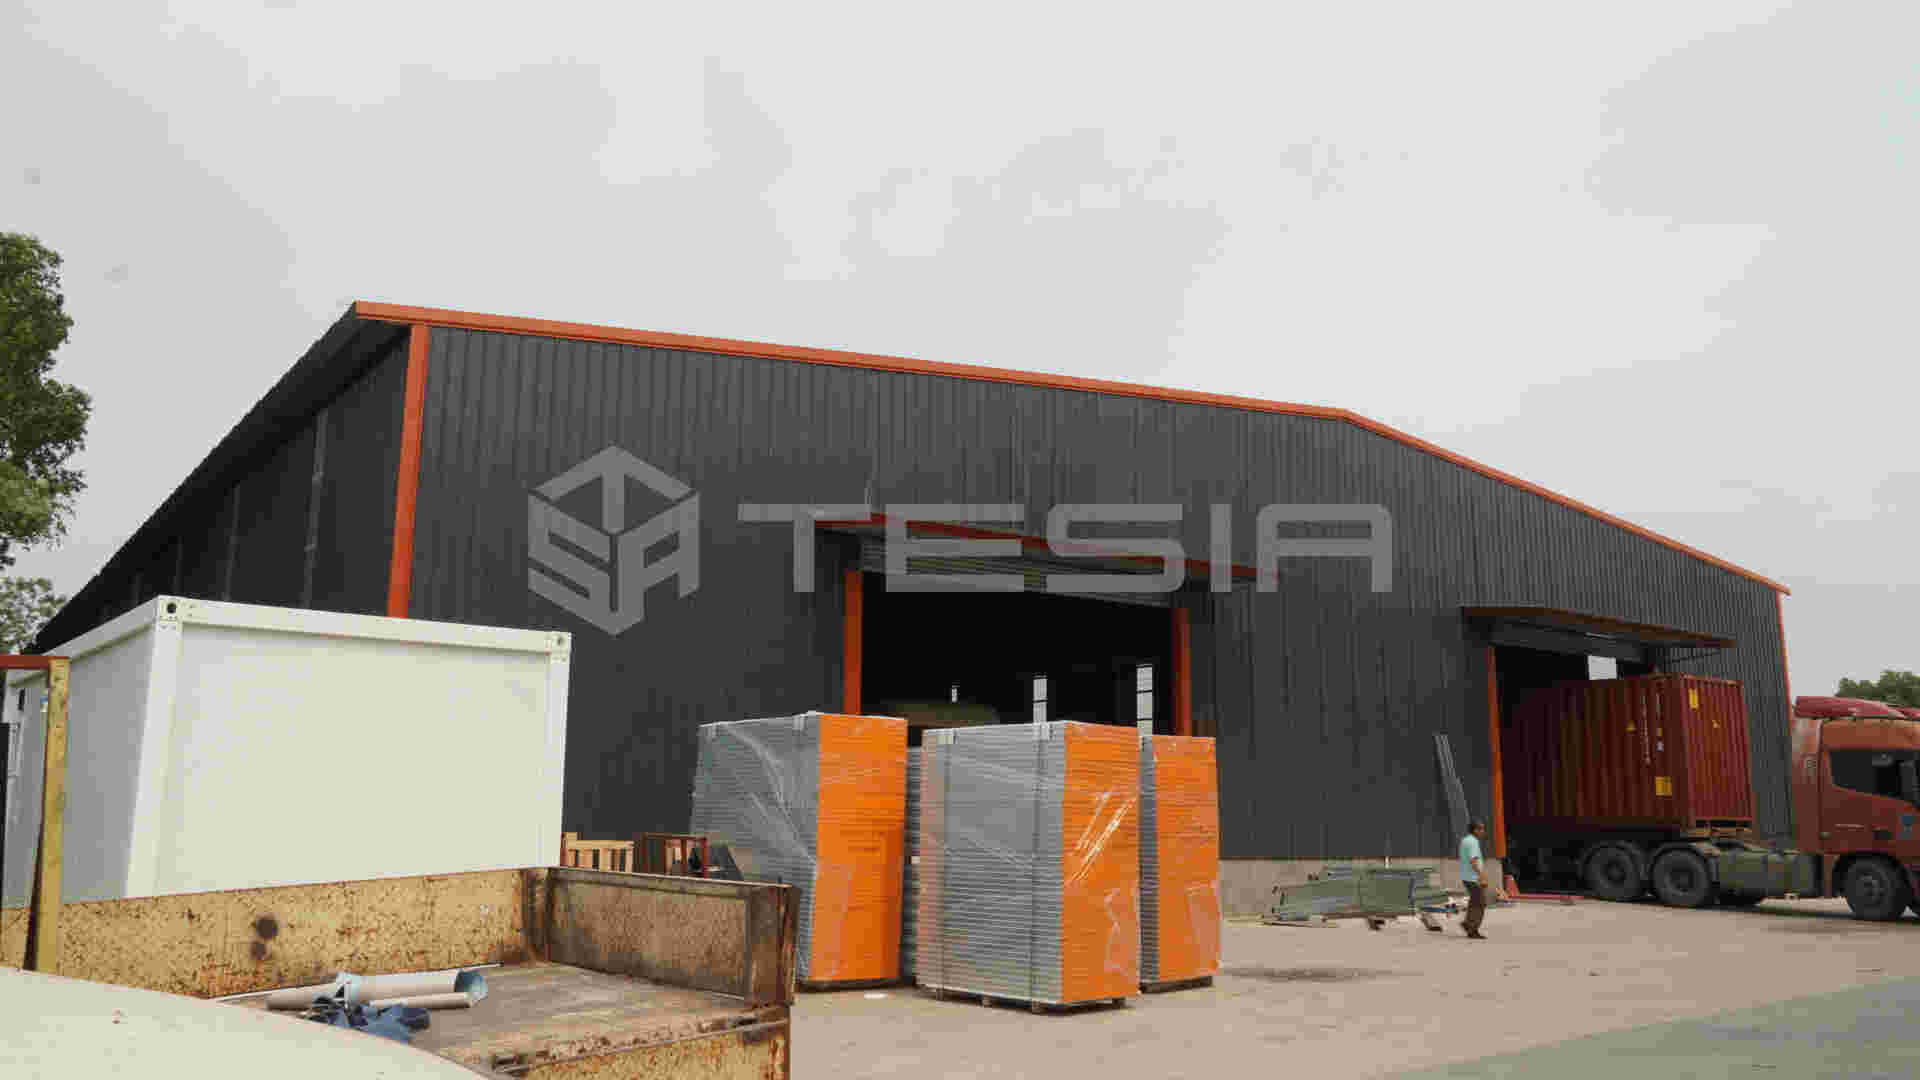 Tesia Industry Co., Limited